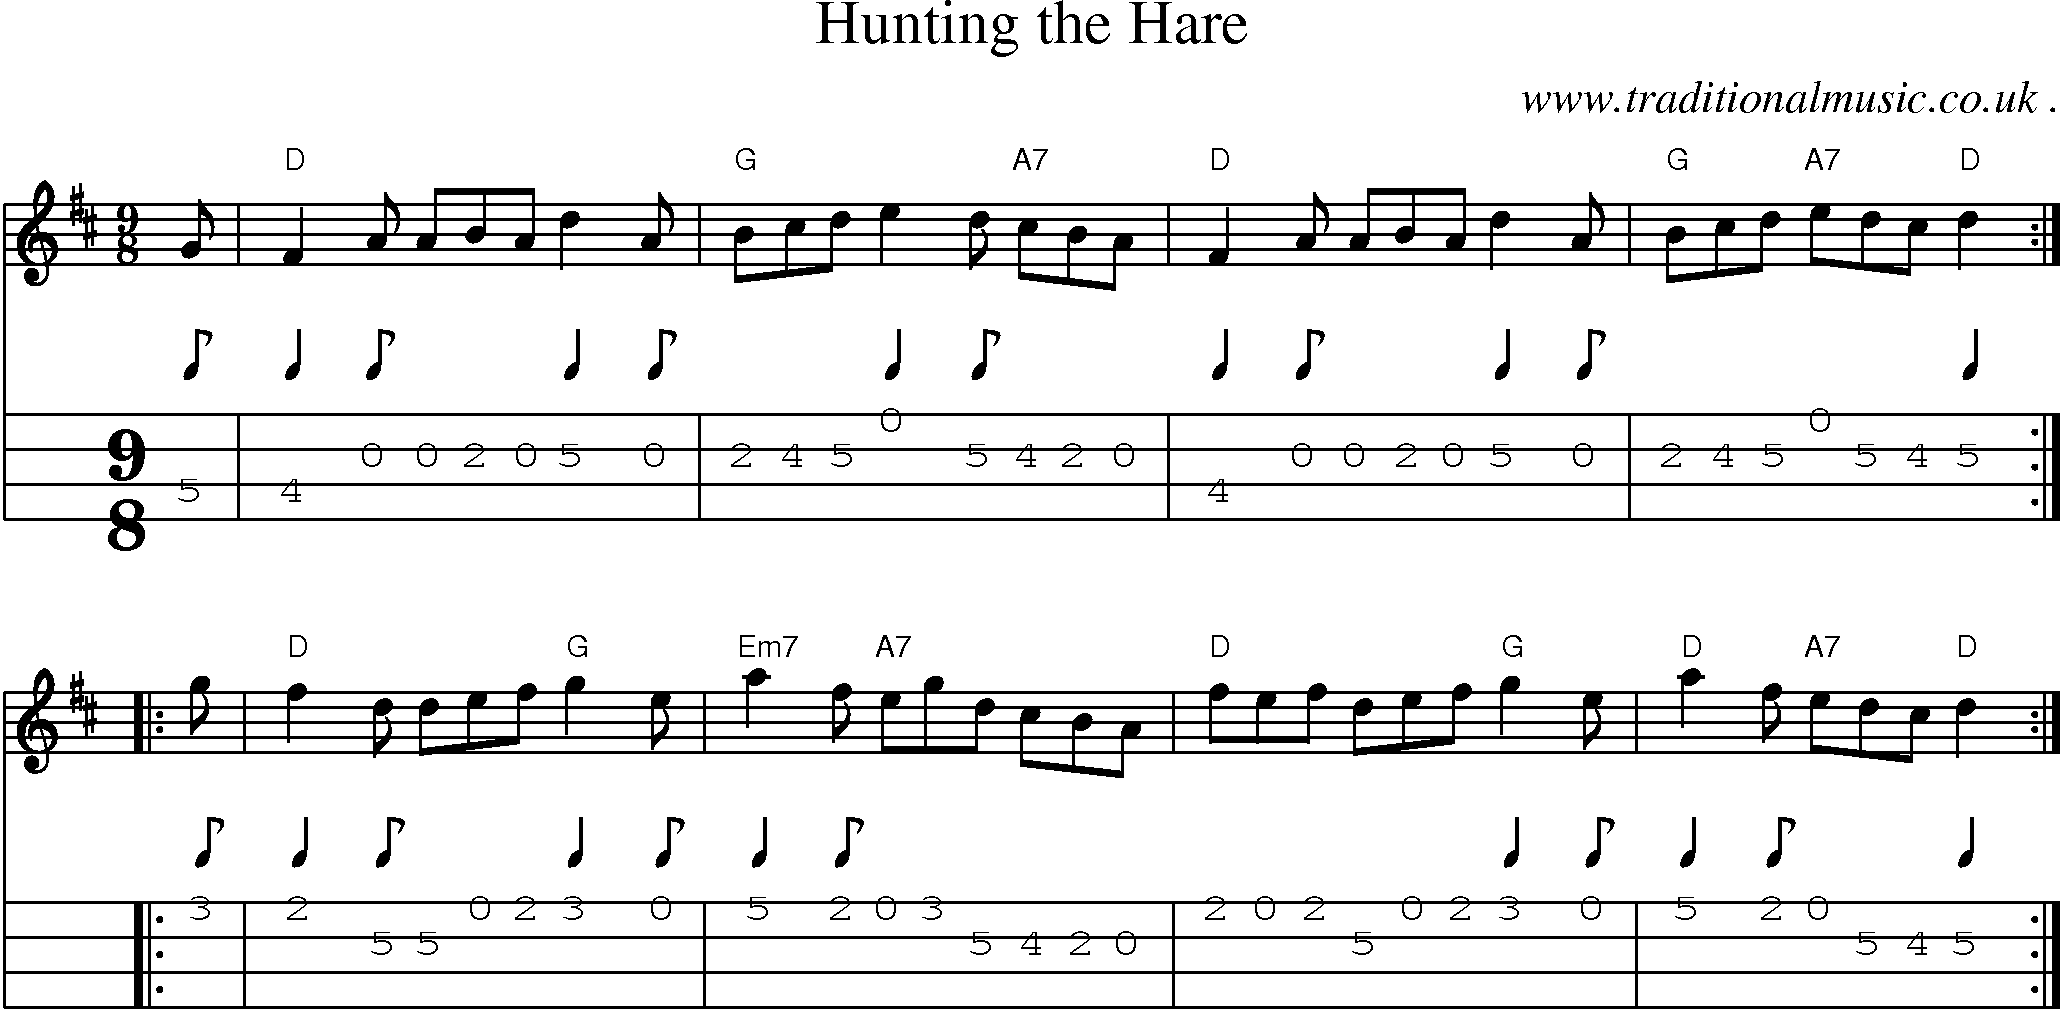 Music Score and Guitar Tabs for Hunting the Hare